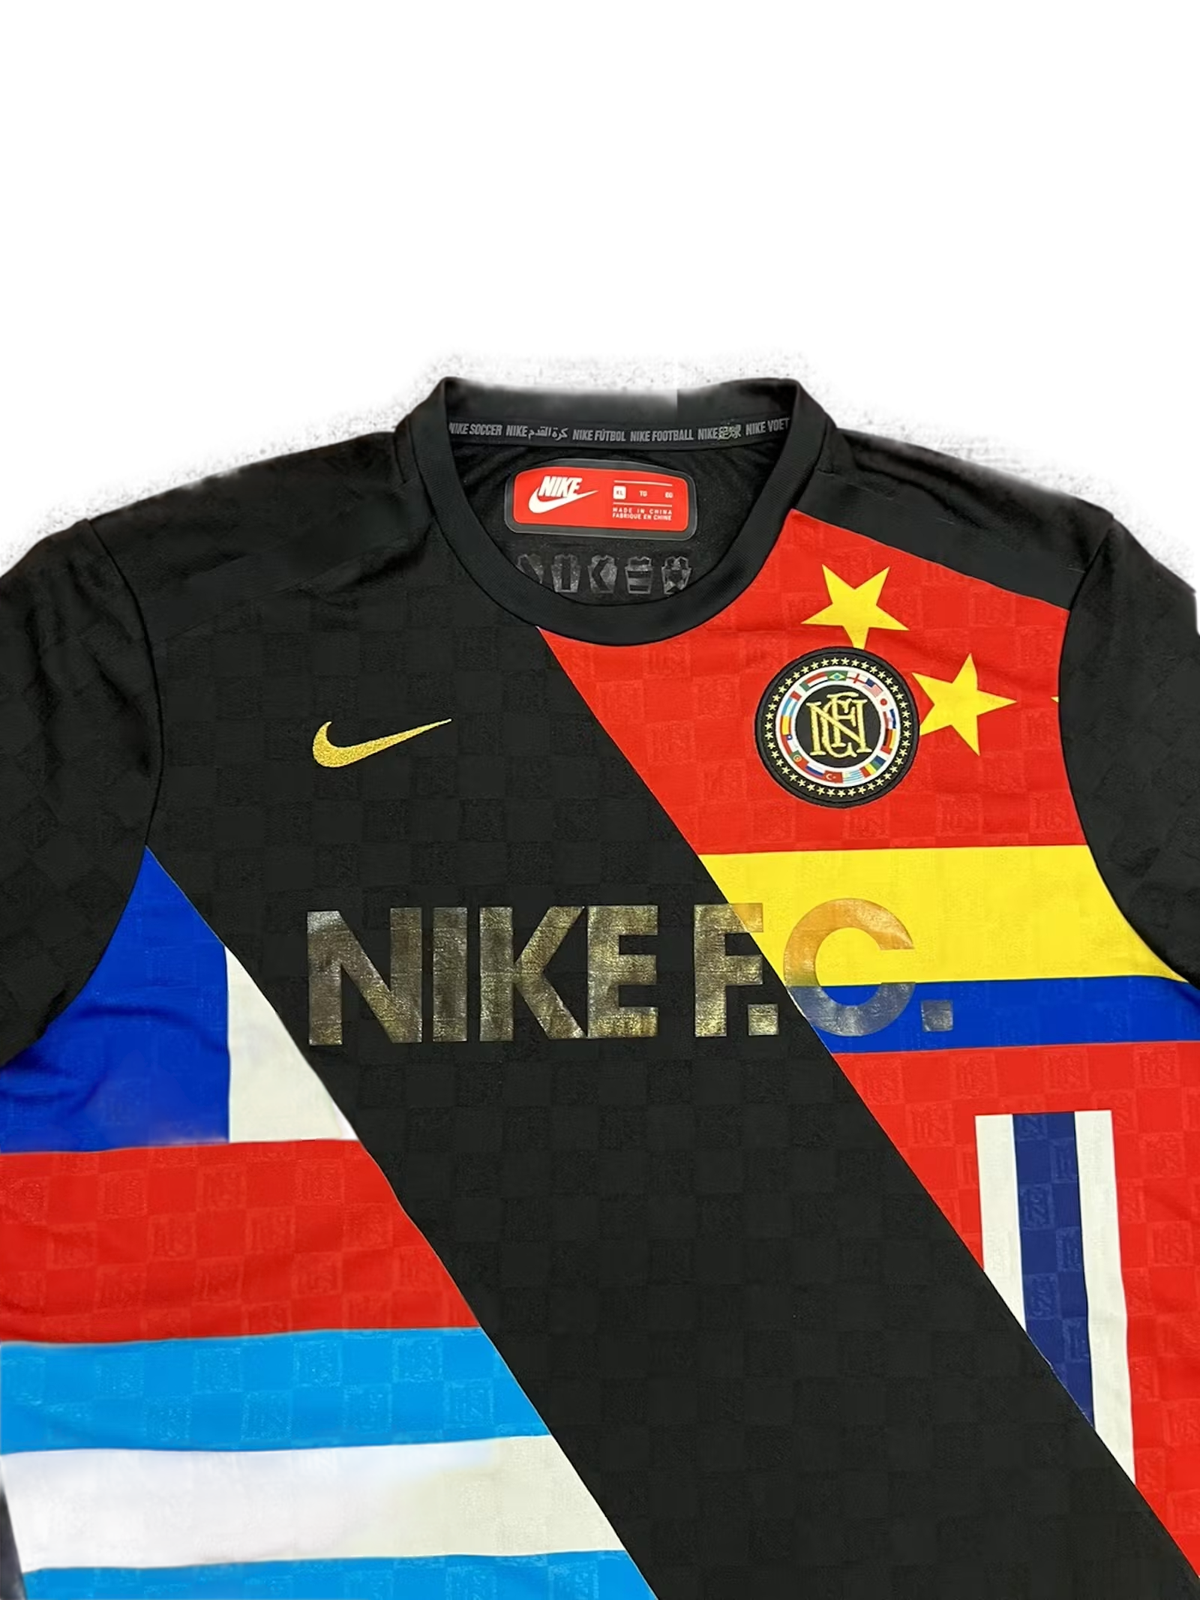 NIKE FC 2018 WORLD CUP JERSEY M